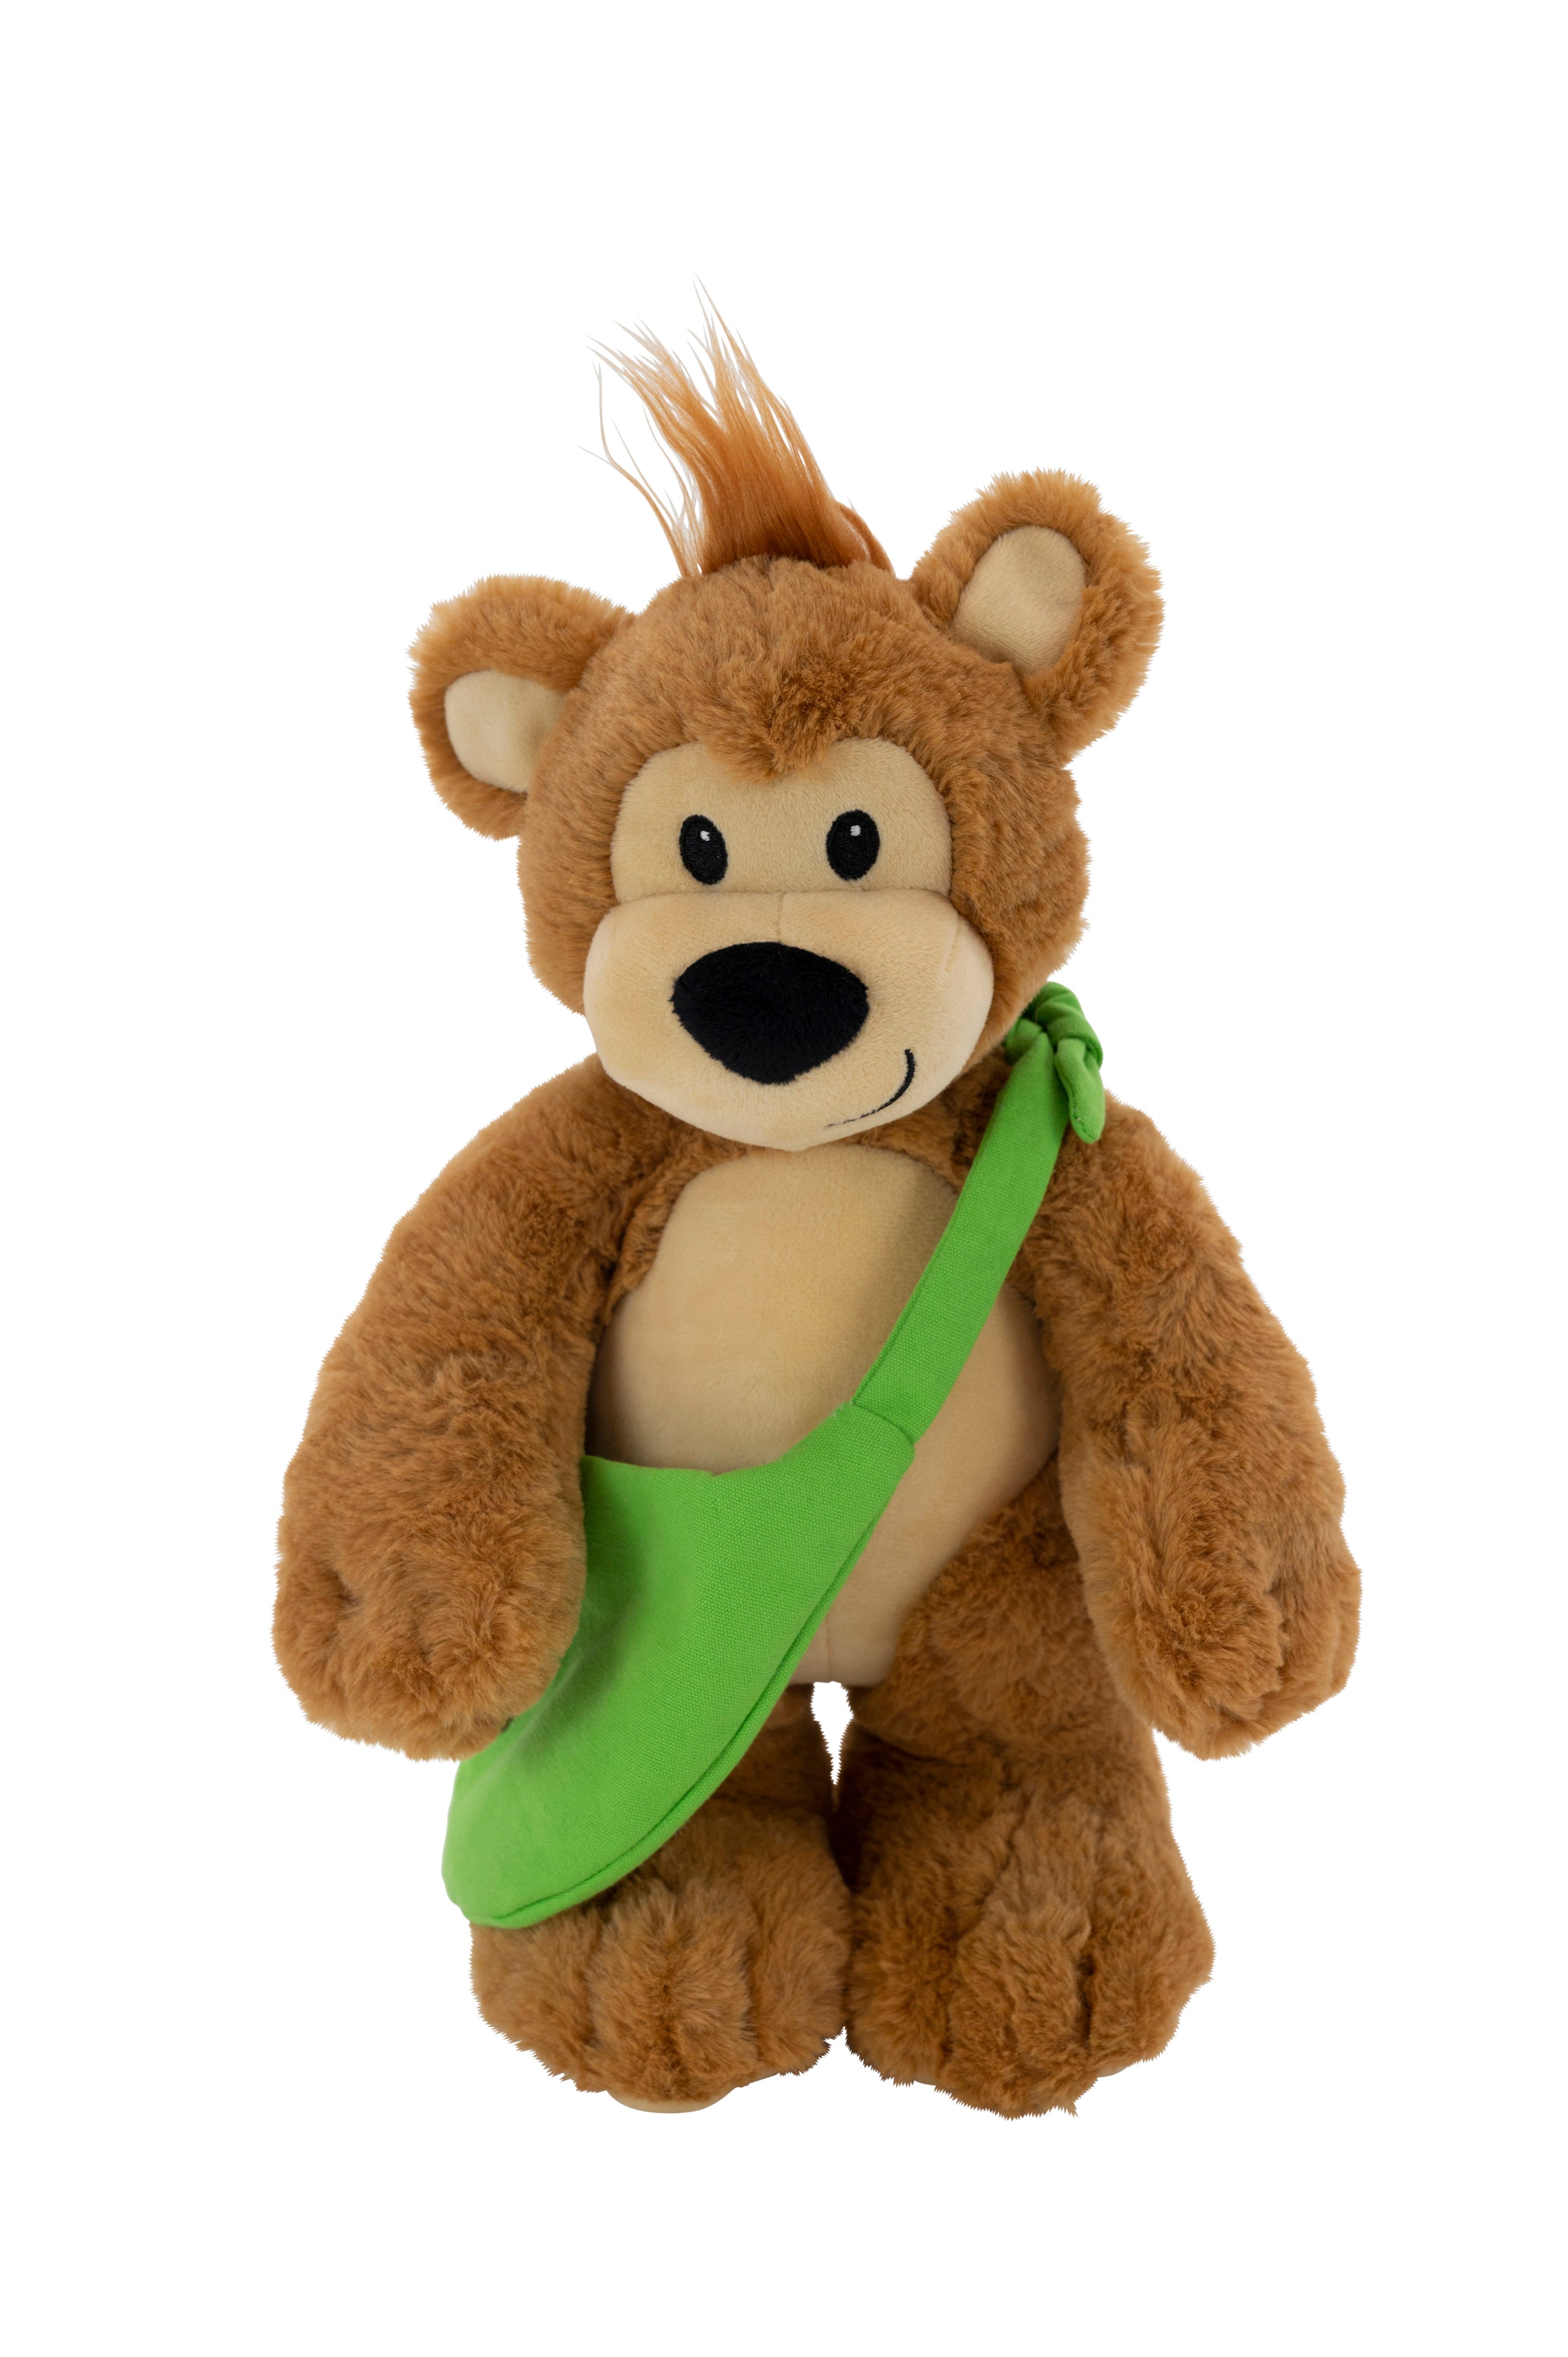 Pawley the Teddy Bear | 14" Stuffed Animal with Matching Bags